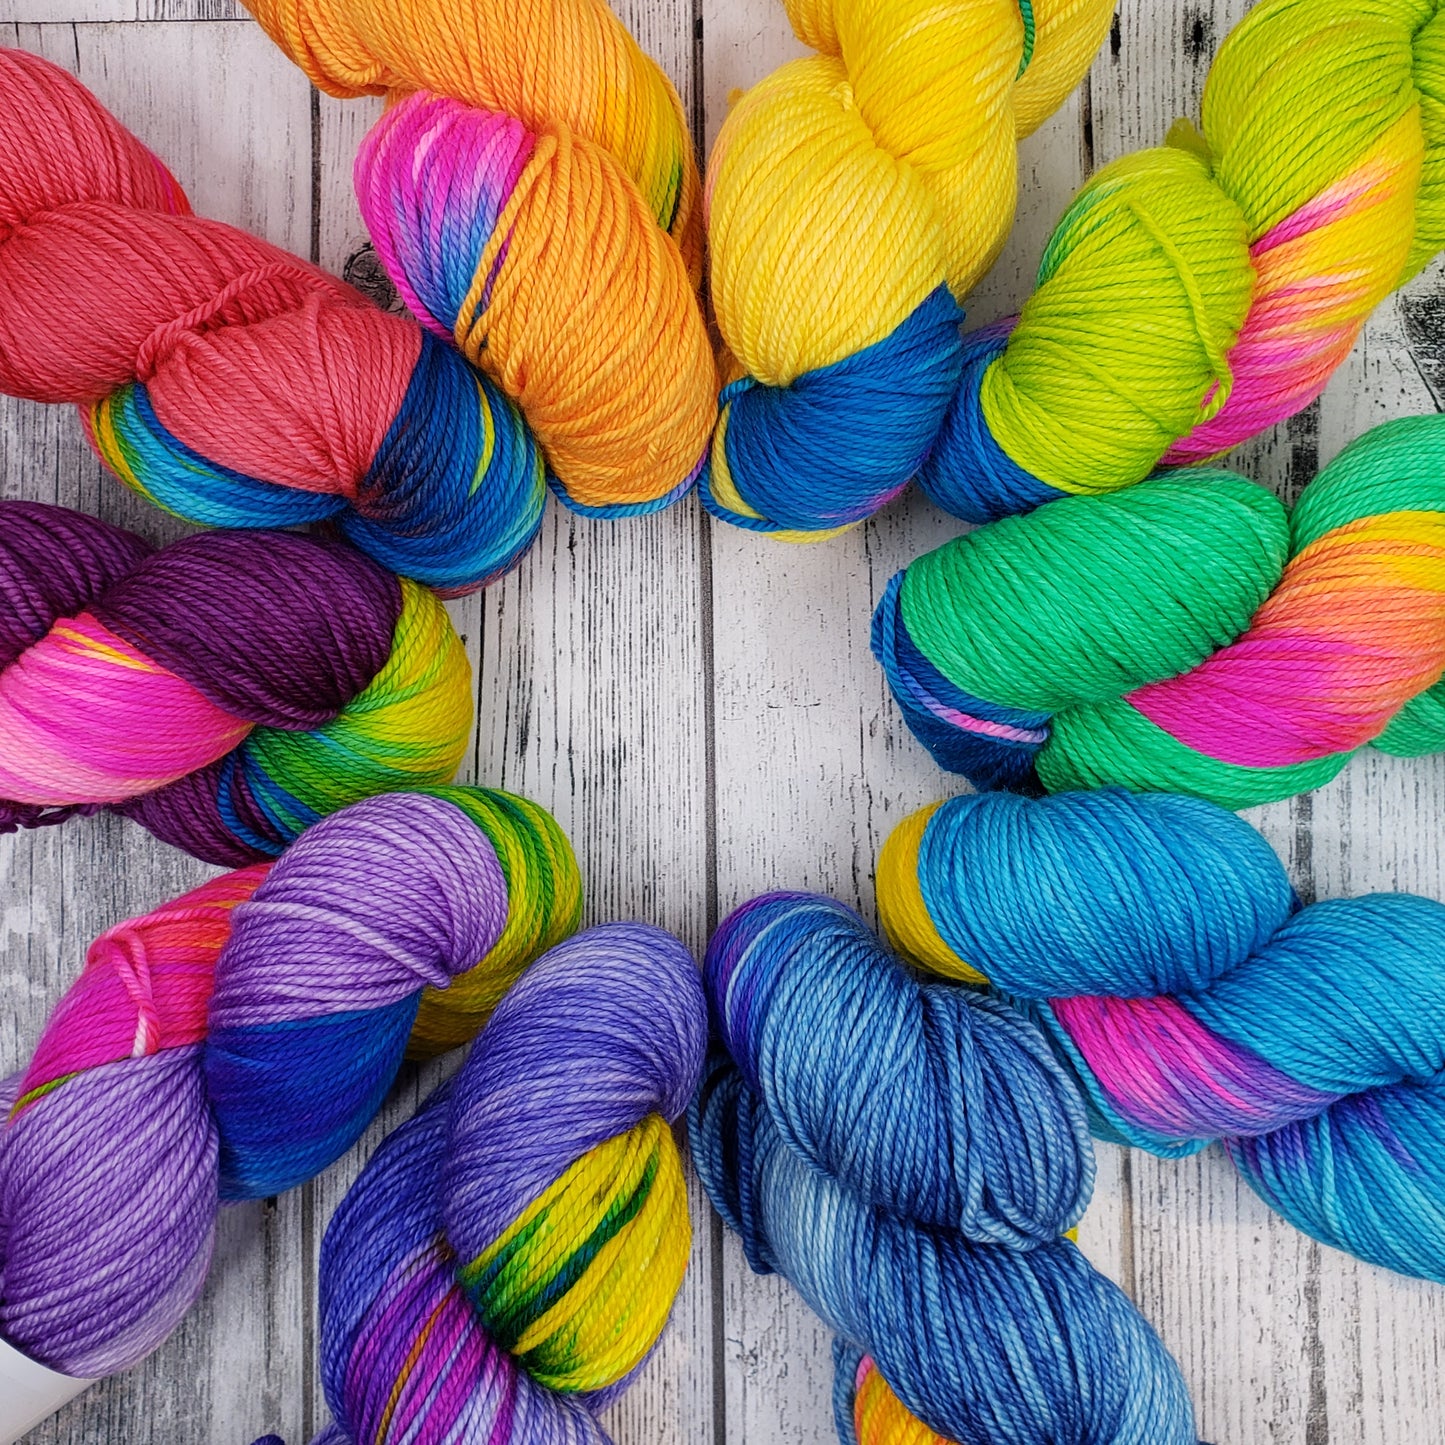 Why Yes, We do LOVE Rainbows - Full Skein Sets